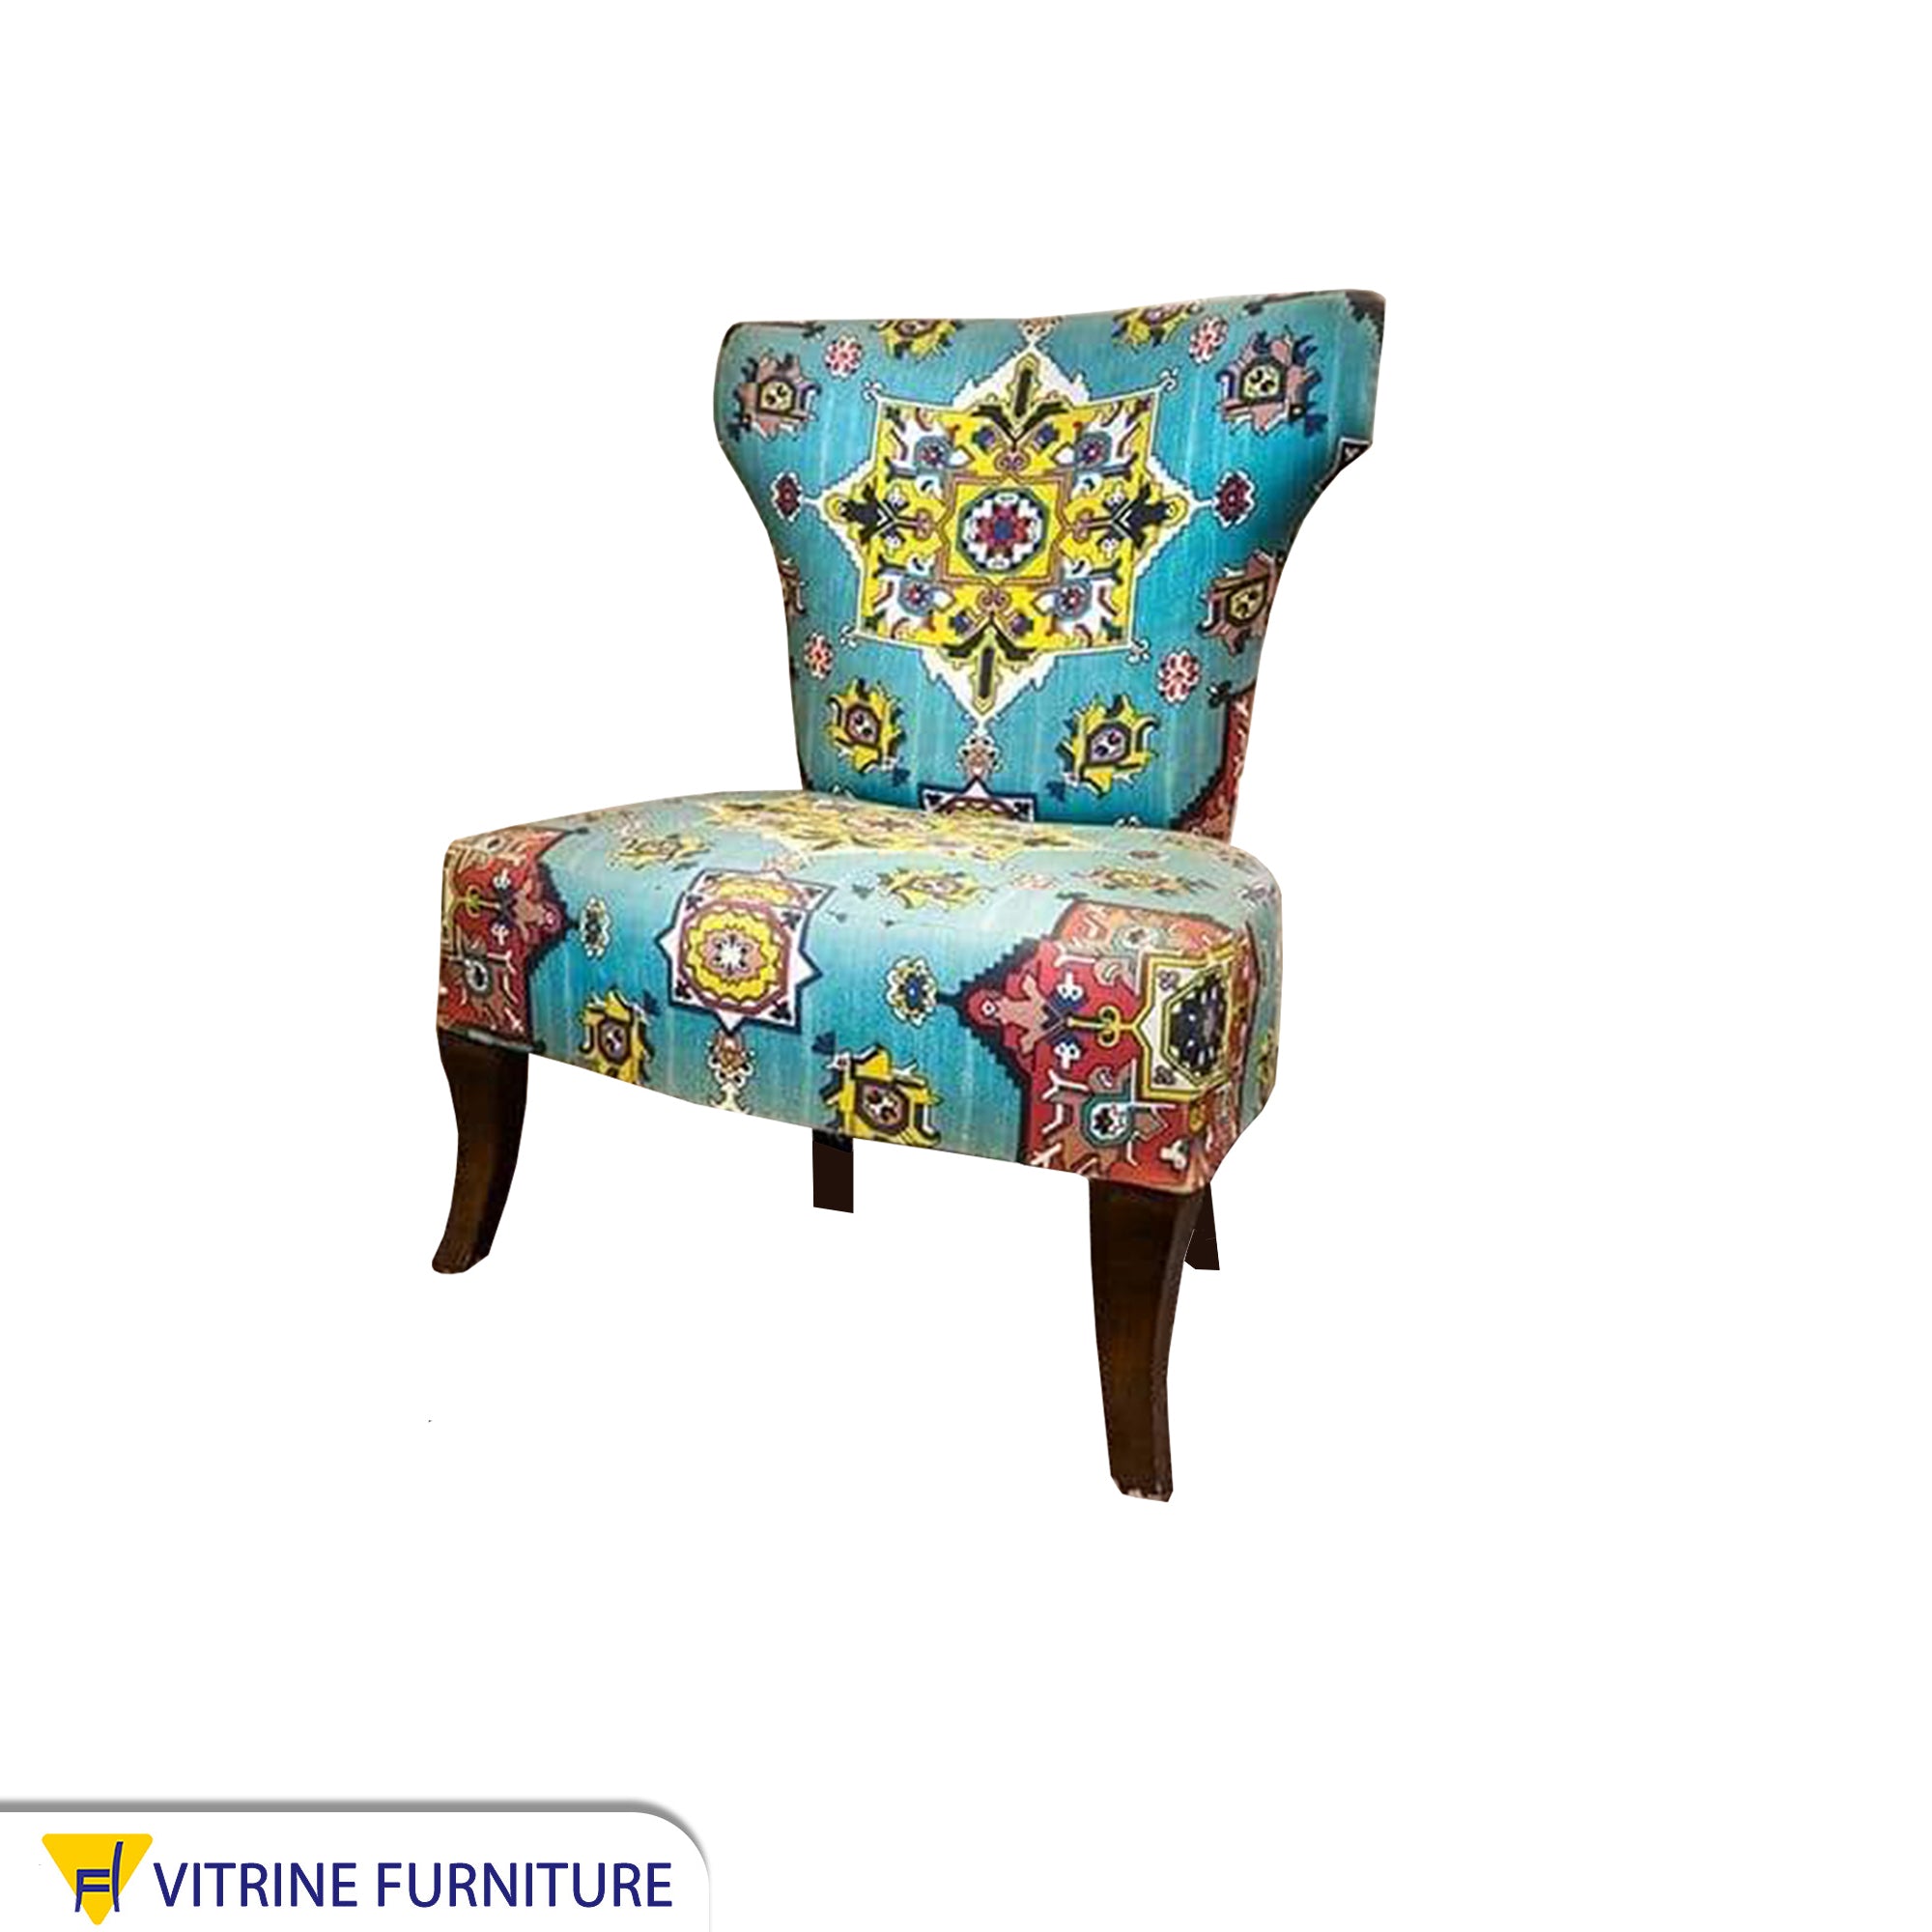 Cyan bright color chair * yellow